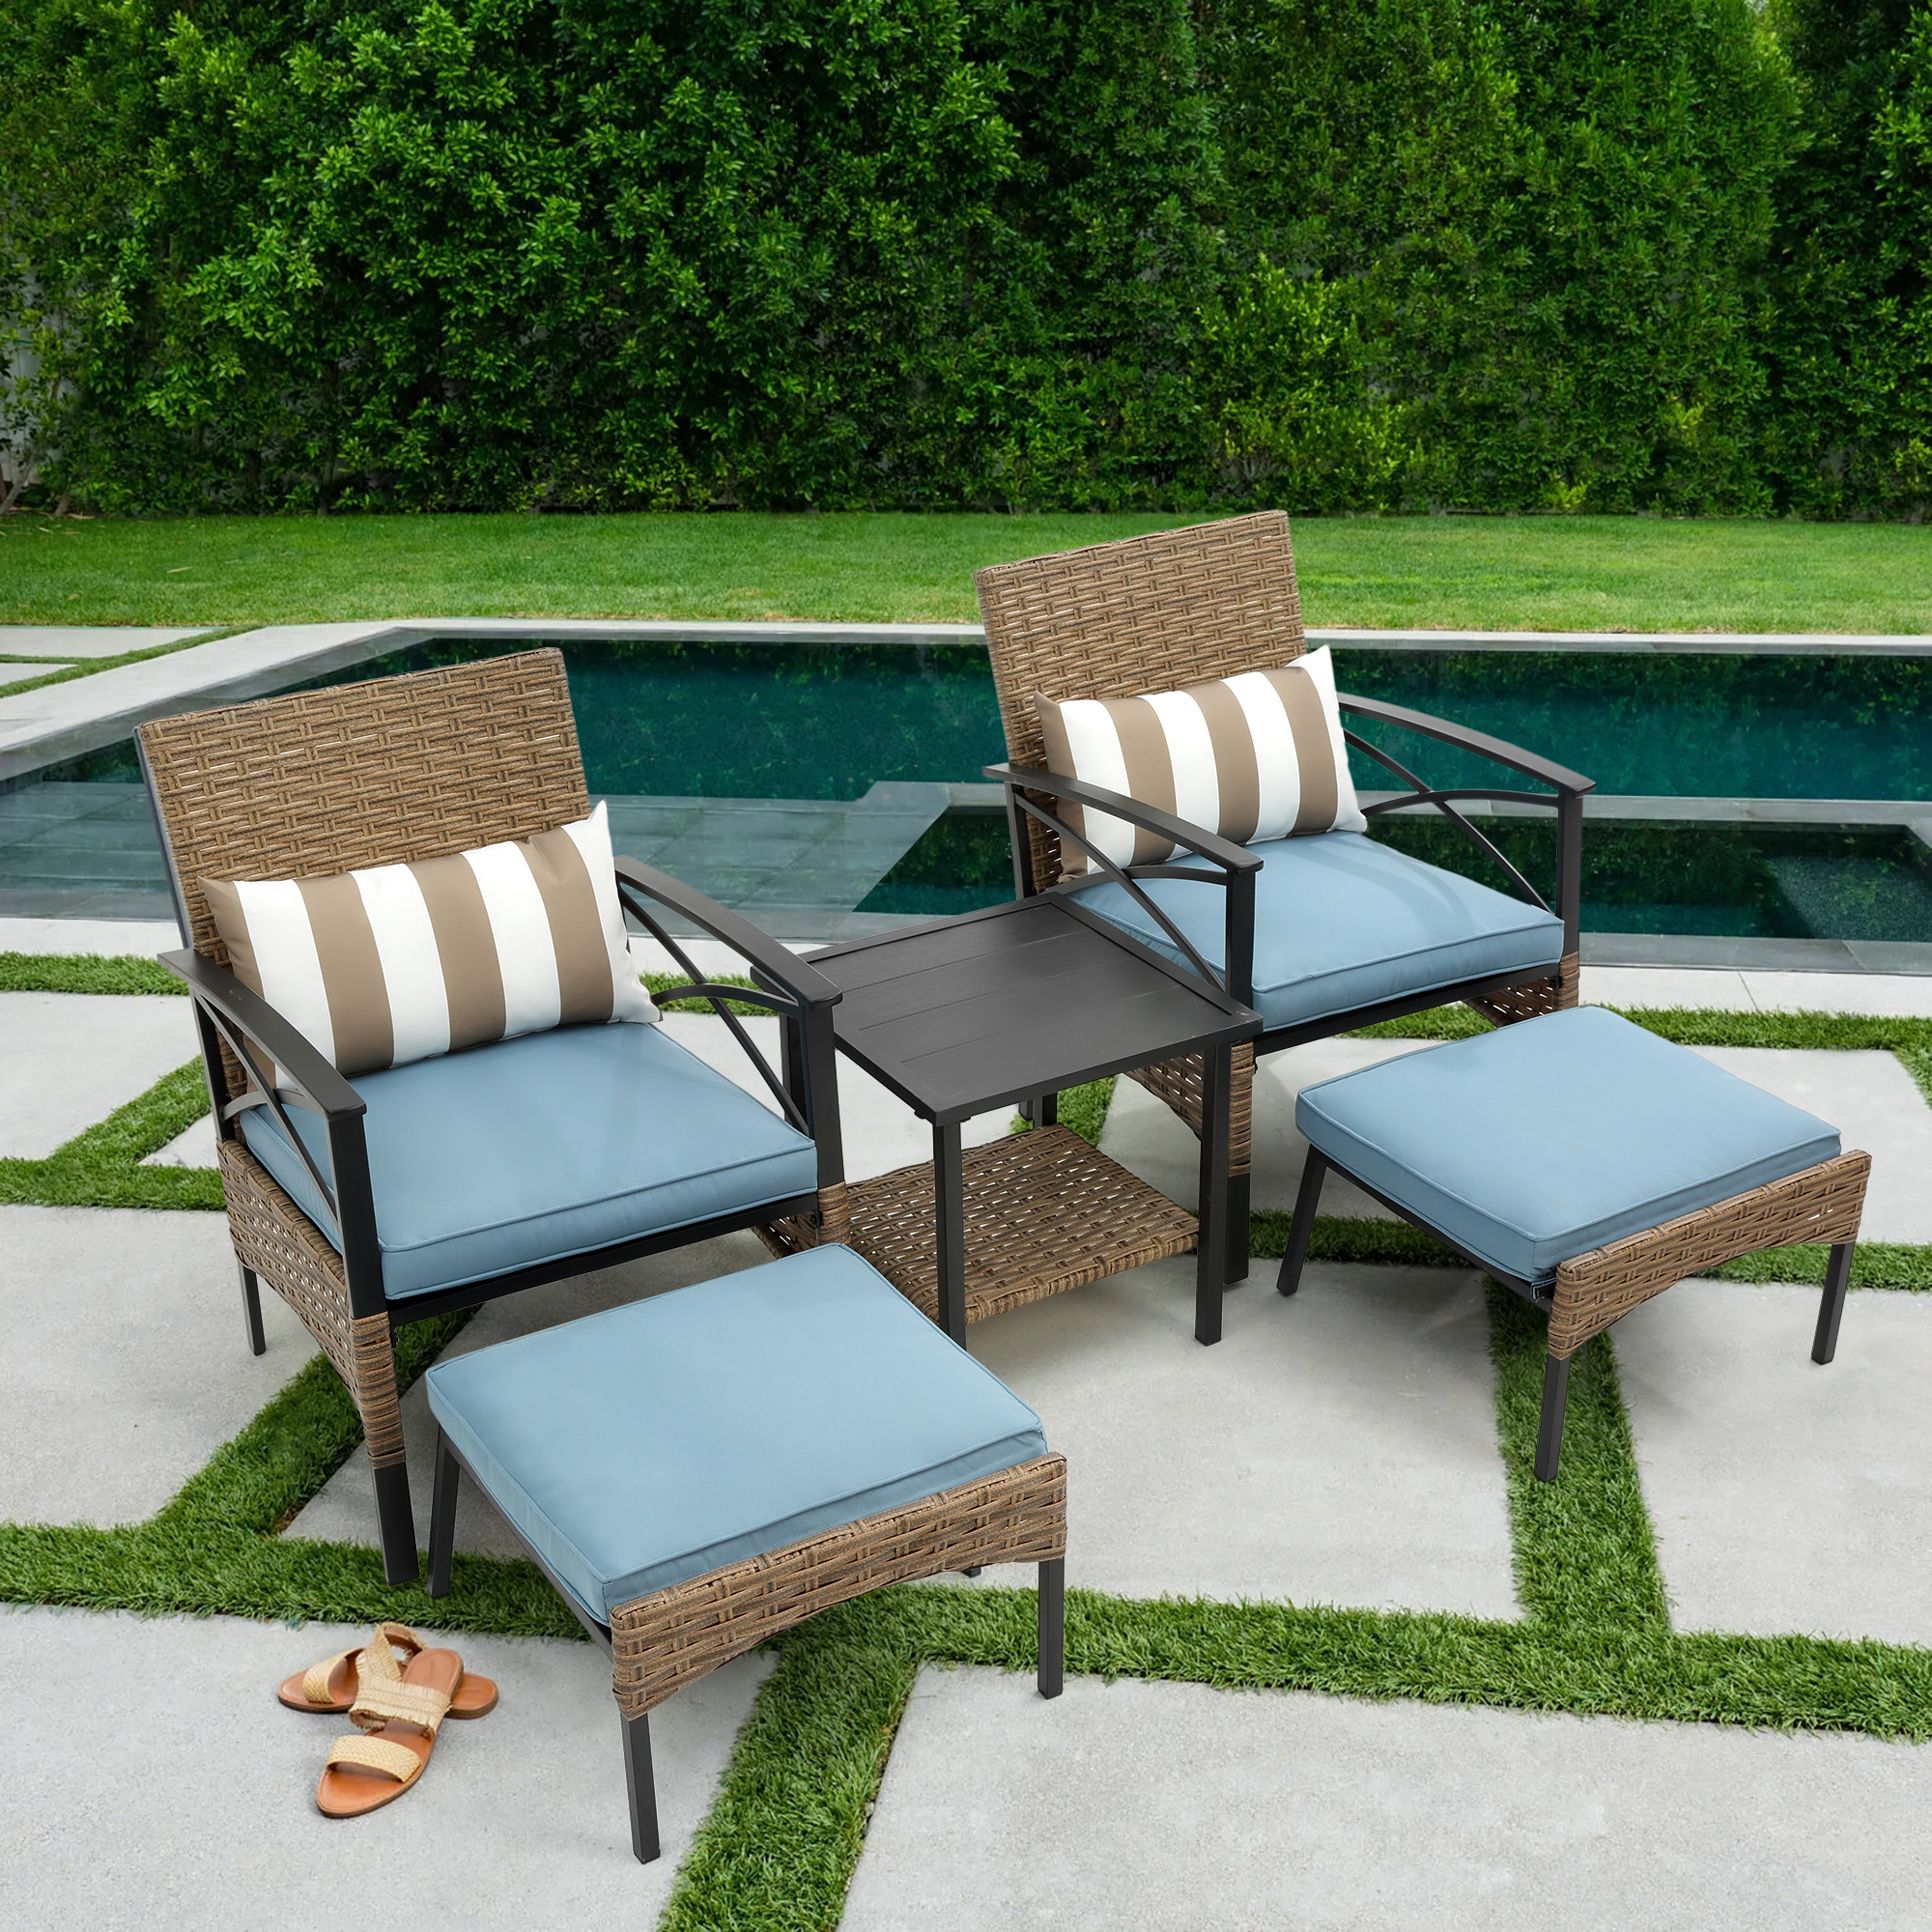 Luccalily Wicker Rattan 5 Pieces Sofa Set, Leisure Chairs with Thick Soft Cushion Set,Pool Lounge Chair Outdoor Patio Furniture Set - image 1 of 11